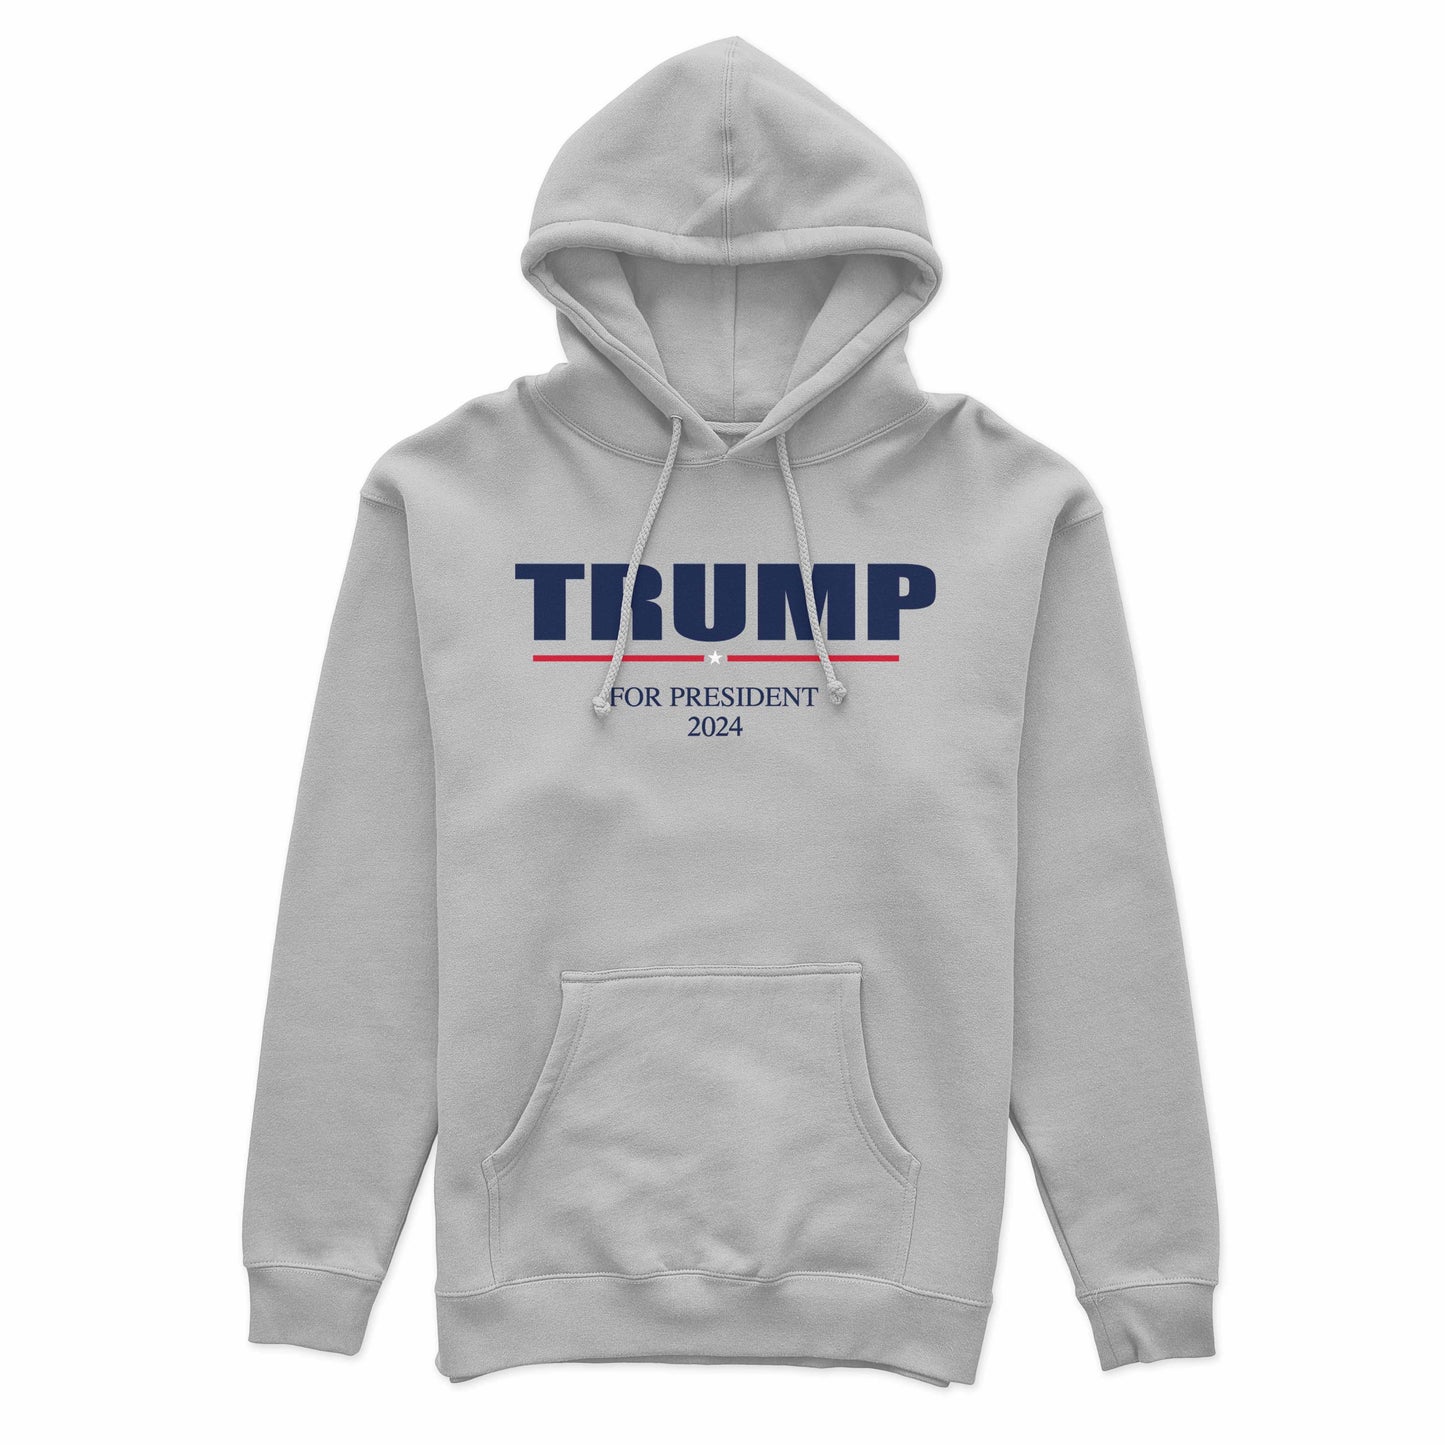 Donald Trump for President 2024 Hoodie